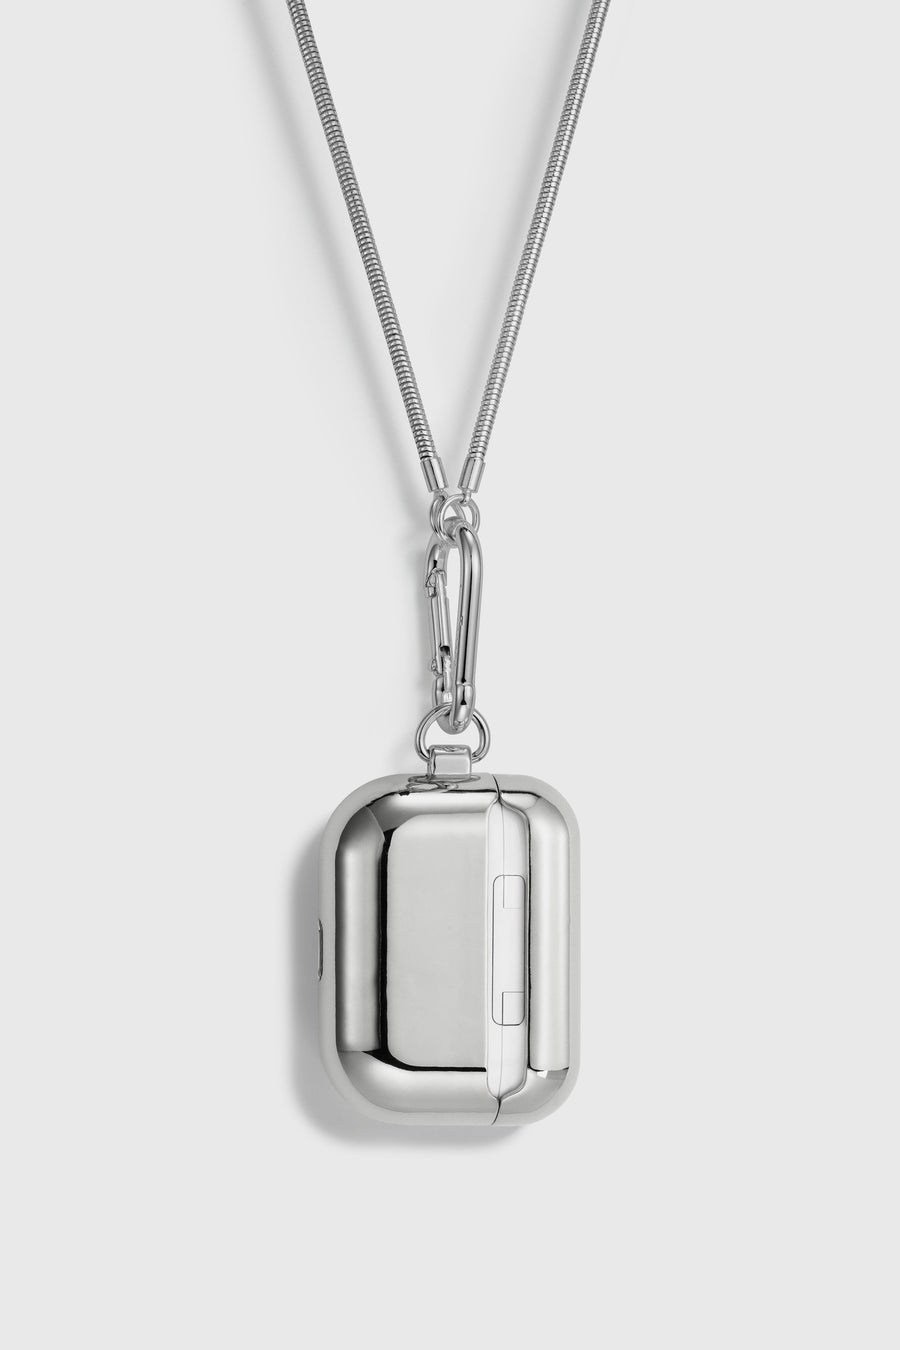 Tapper's real 925 silver plated original metal neck case tech jewelry protects and keeps your Apple AirPods Pro close at hand. The luxurious, elevated and accessible neck case plated in precious metals steps up your AirPods Pro jewellery game. Worried about losing your AirPods? Detachable snake chain and carabiner for convenient and hassle-free safekeeping around your neck. The next must-have accessory crafted for ultimate luxury. Compatible with AirPods Pro. Designed in Sweden. Free Express Shipping.